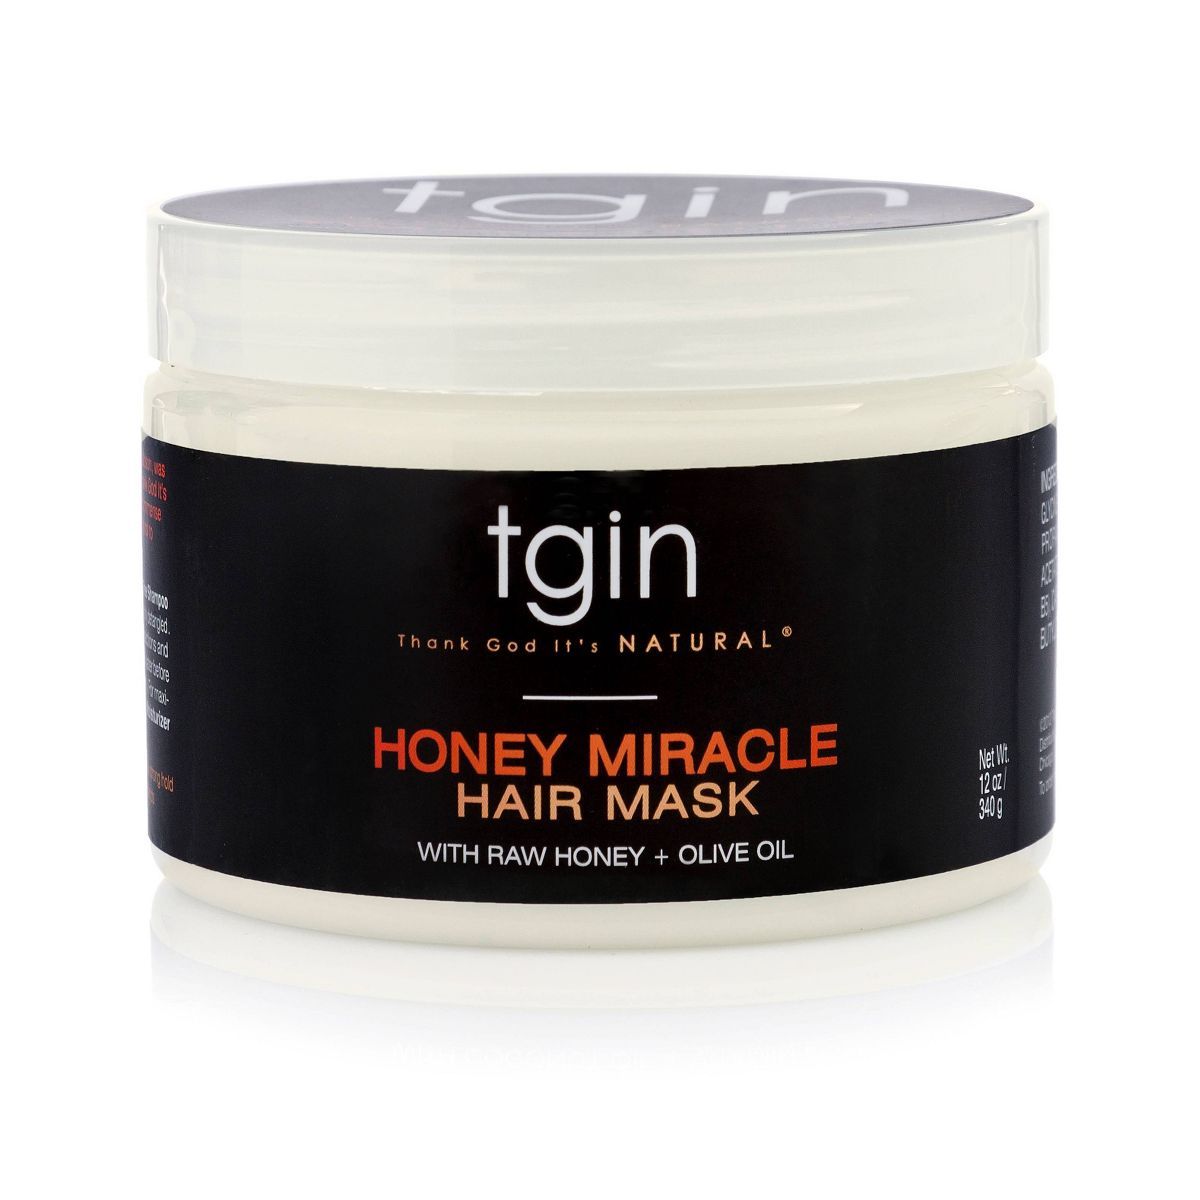 TGIN Honey Miracle Hair Mask with Raw Honey + Olive Oil Deep Conditioner - 12oz | Target